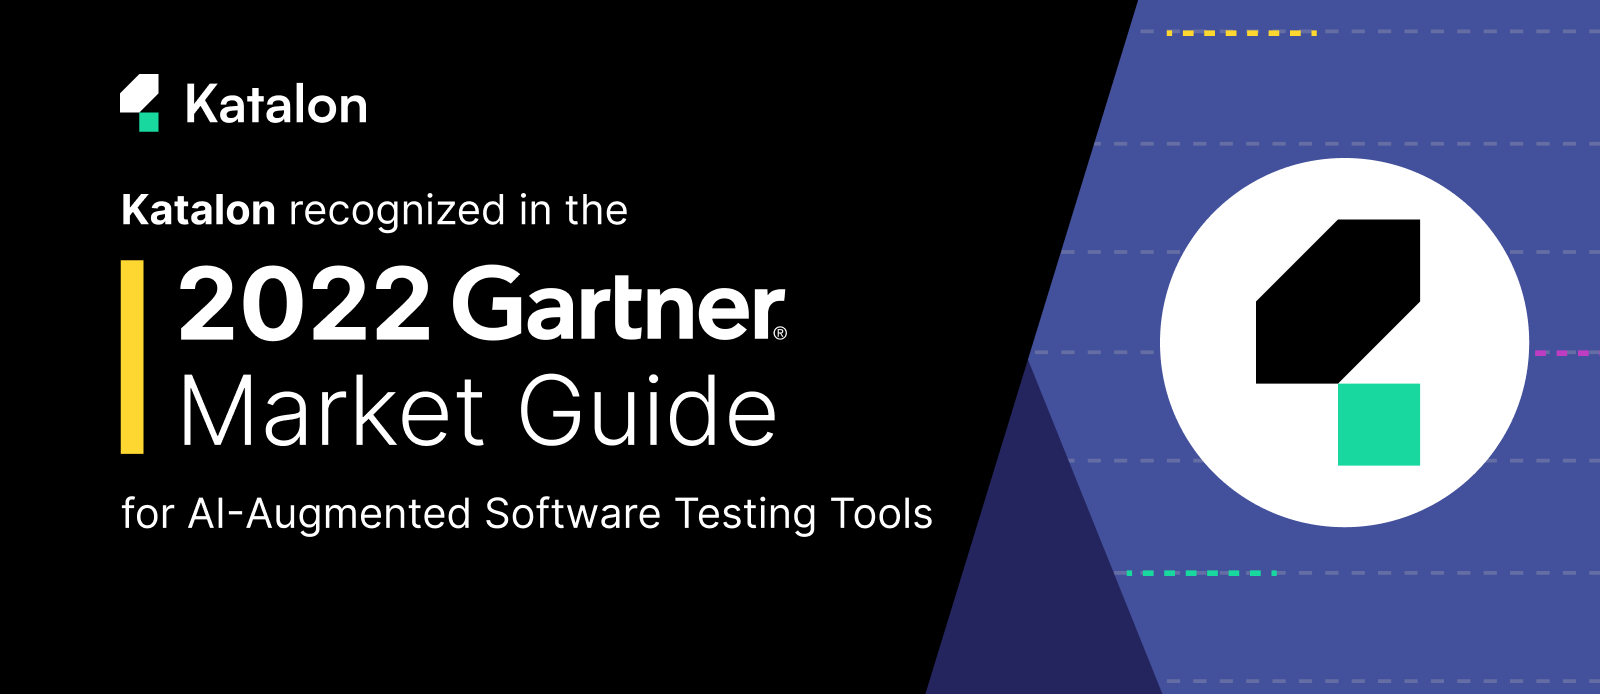 Katalon recognized in 2022 Gartner Market Guide for AI-Augmented Software Testing Tools